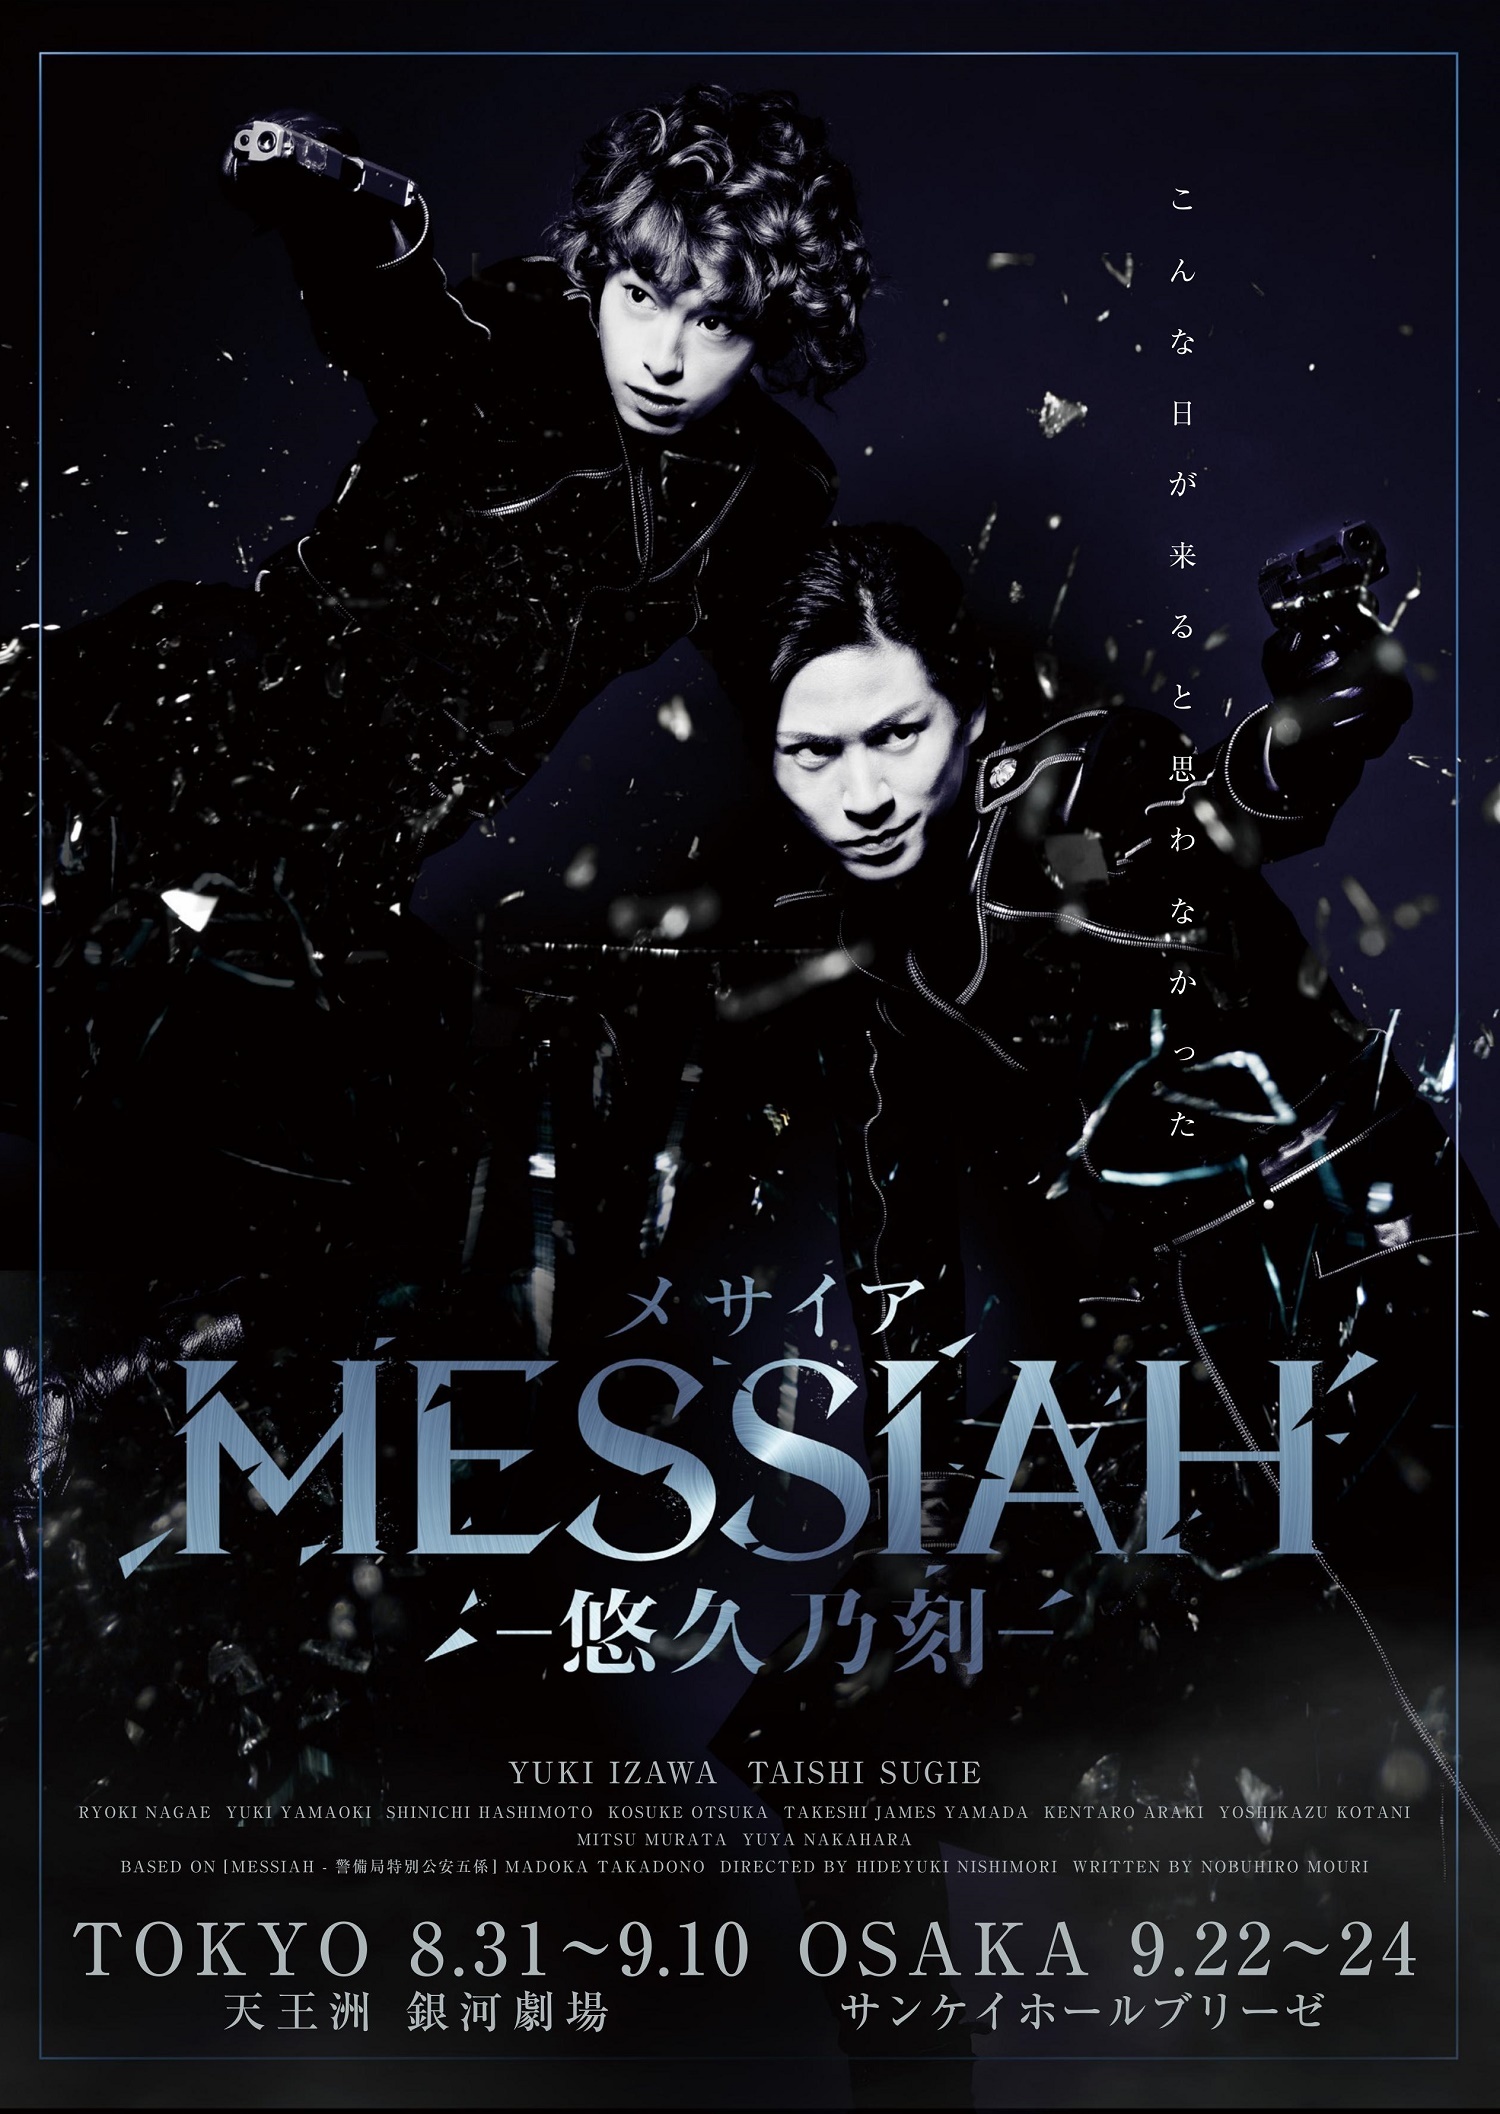 ⓒMESSIAH PROJECT ⓒ2017 舞台メサイア悠久乃刻製作委員会